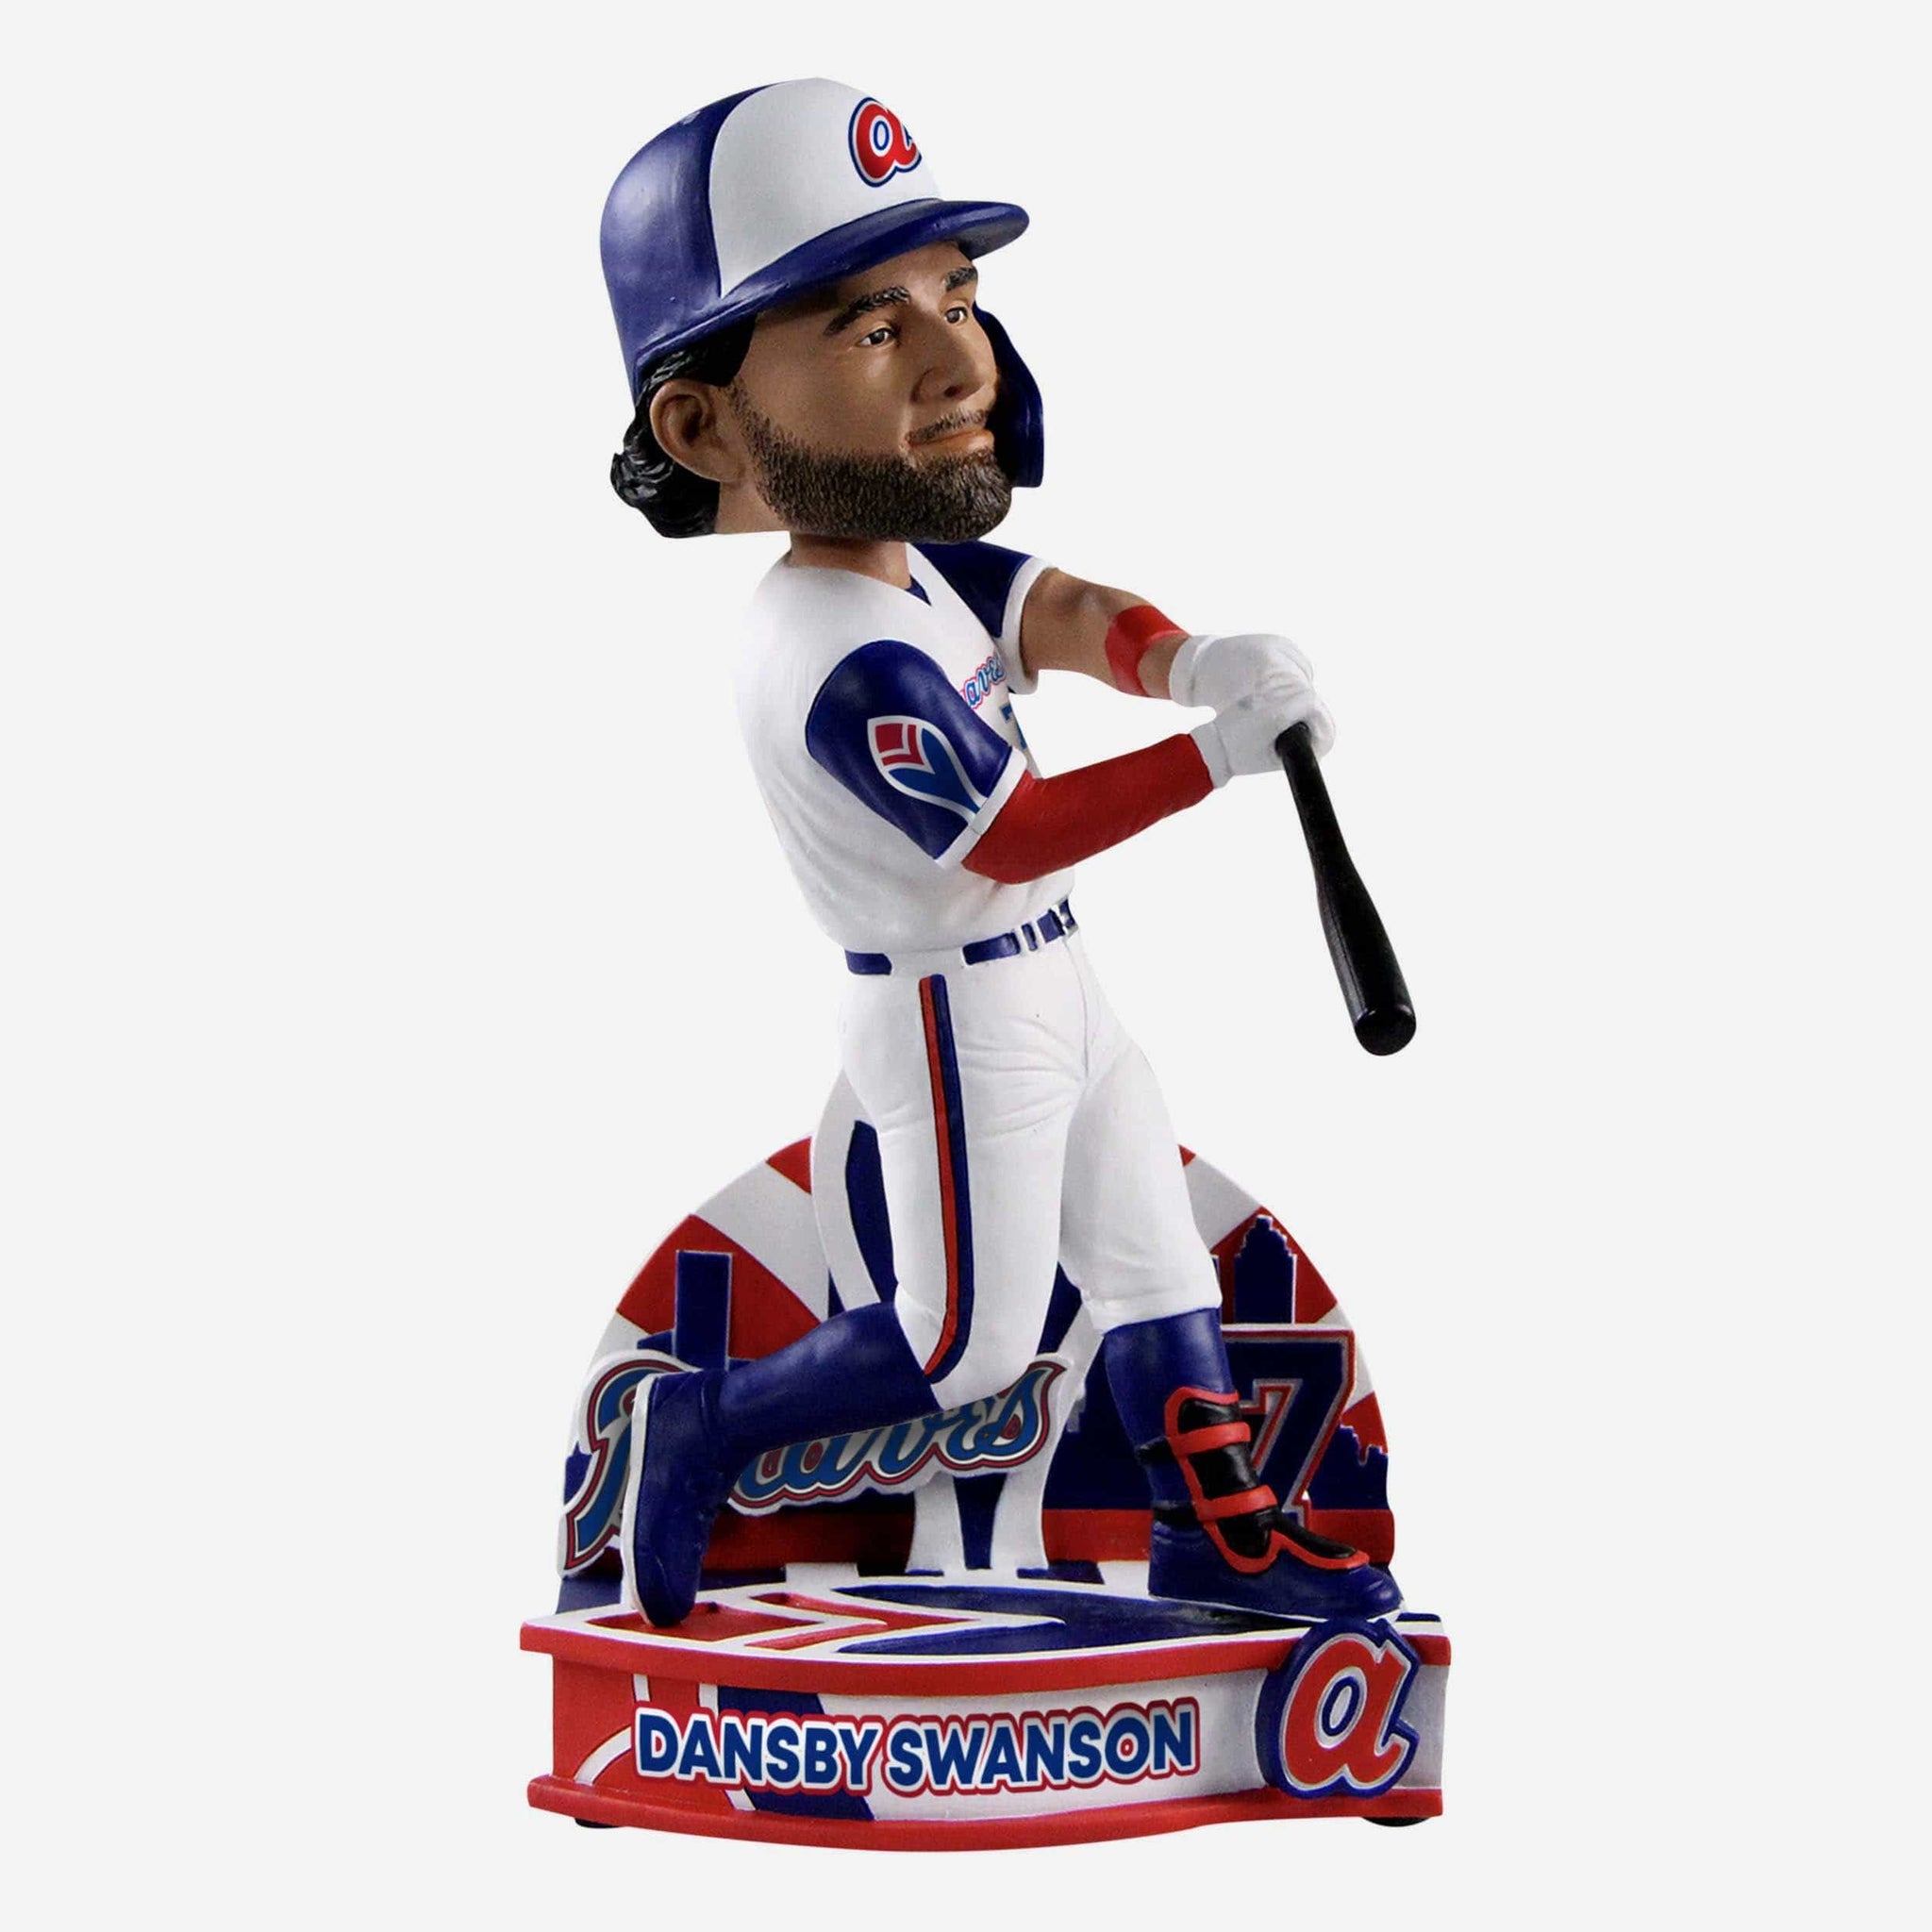 Show Off Your Atlanta Braves Pride with the Dansby Swanson Men